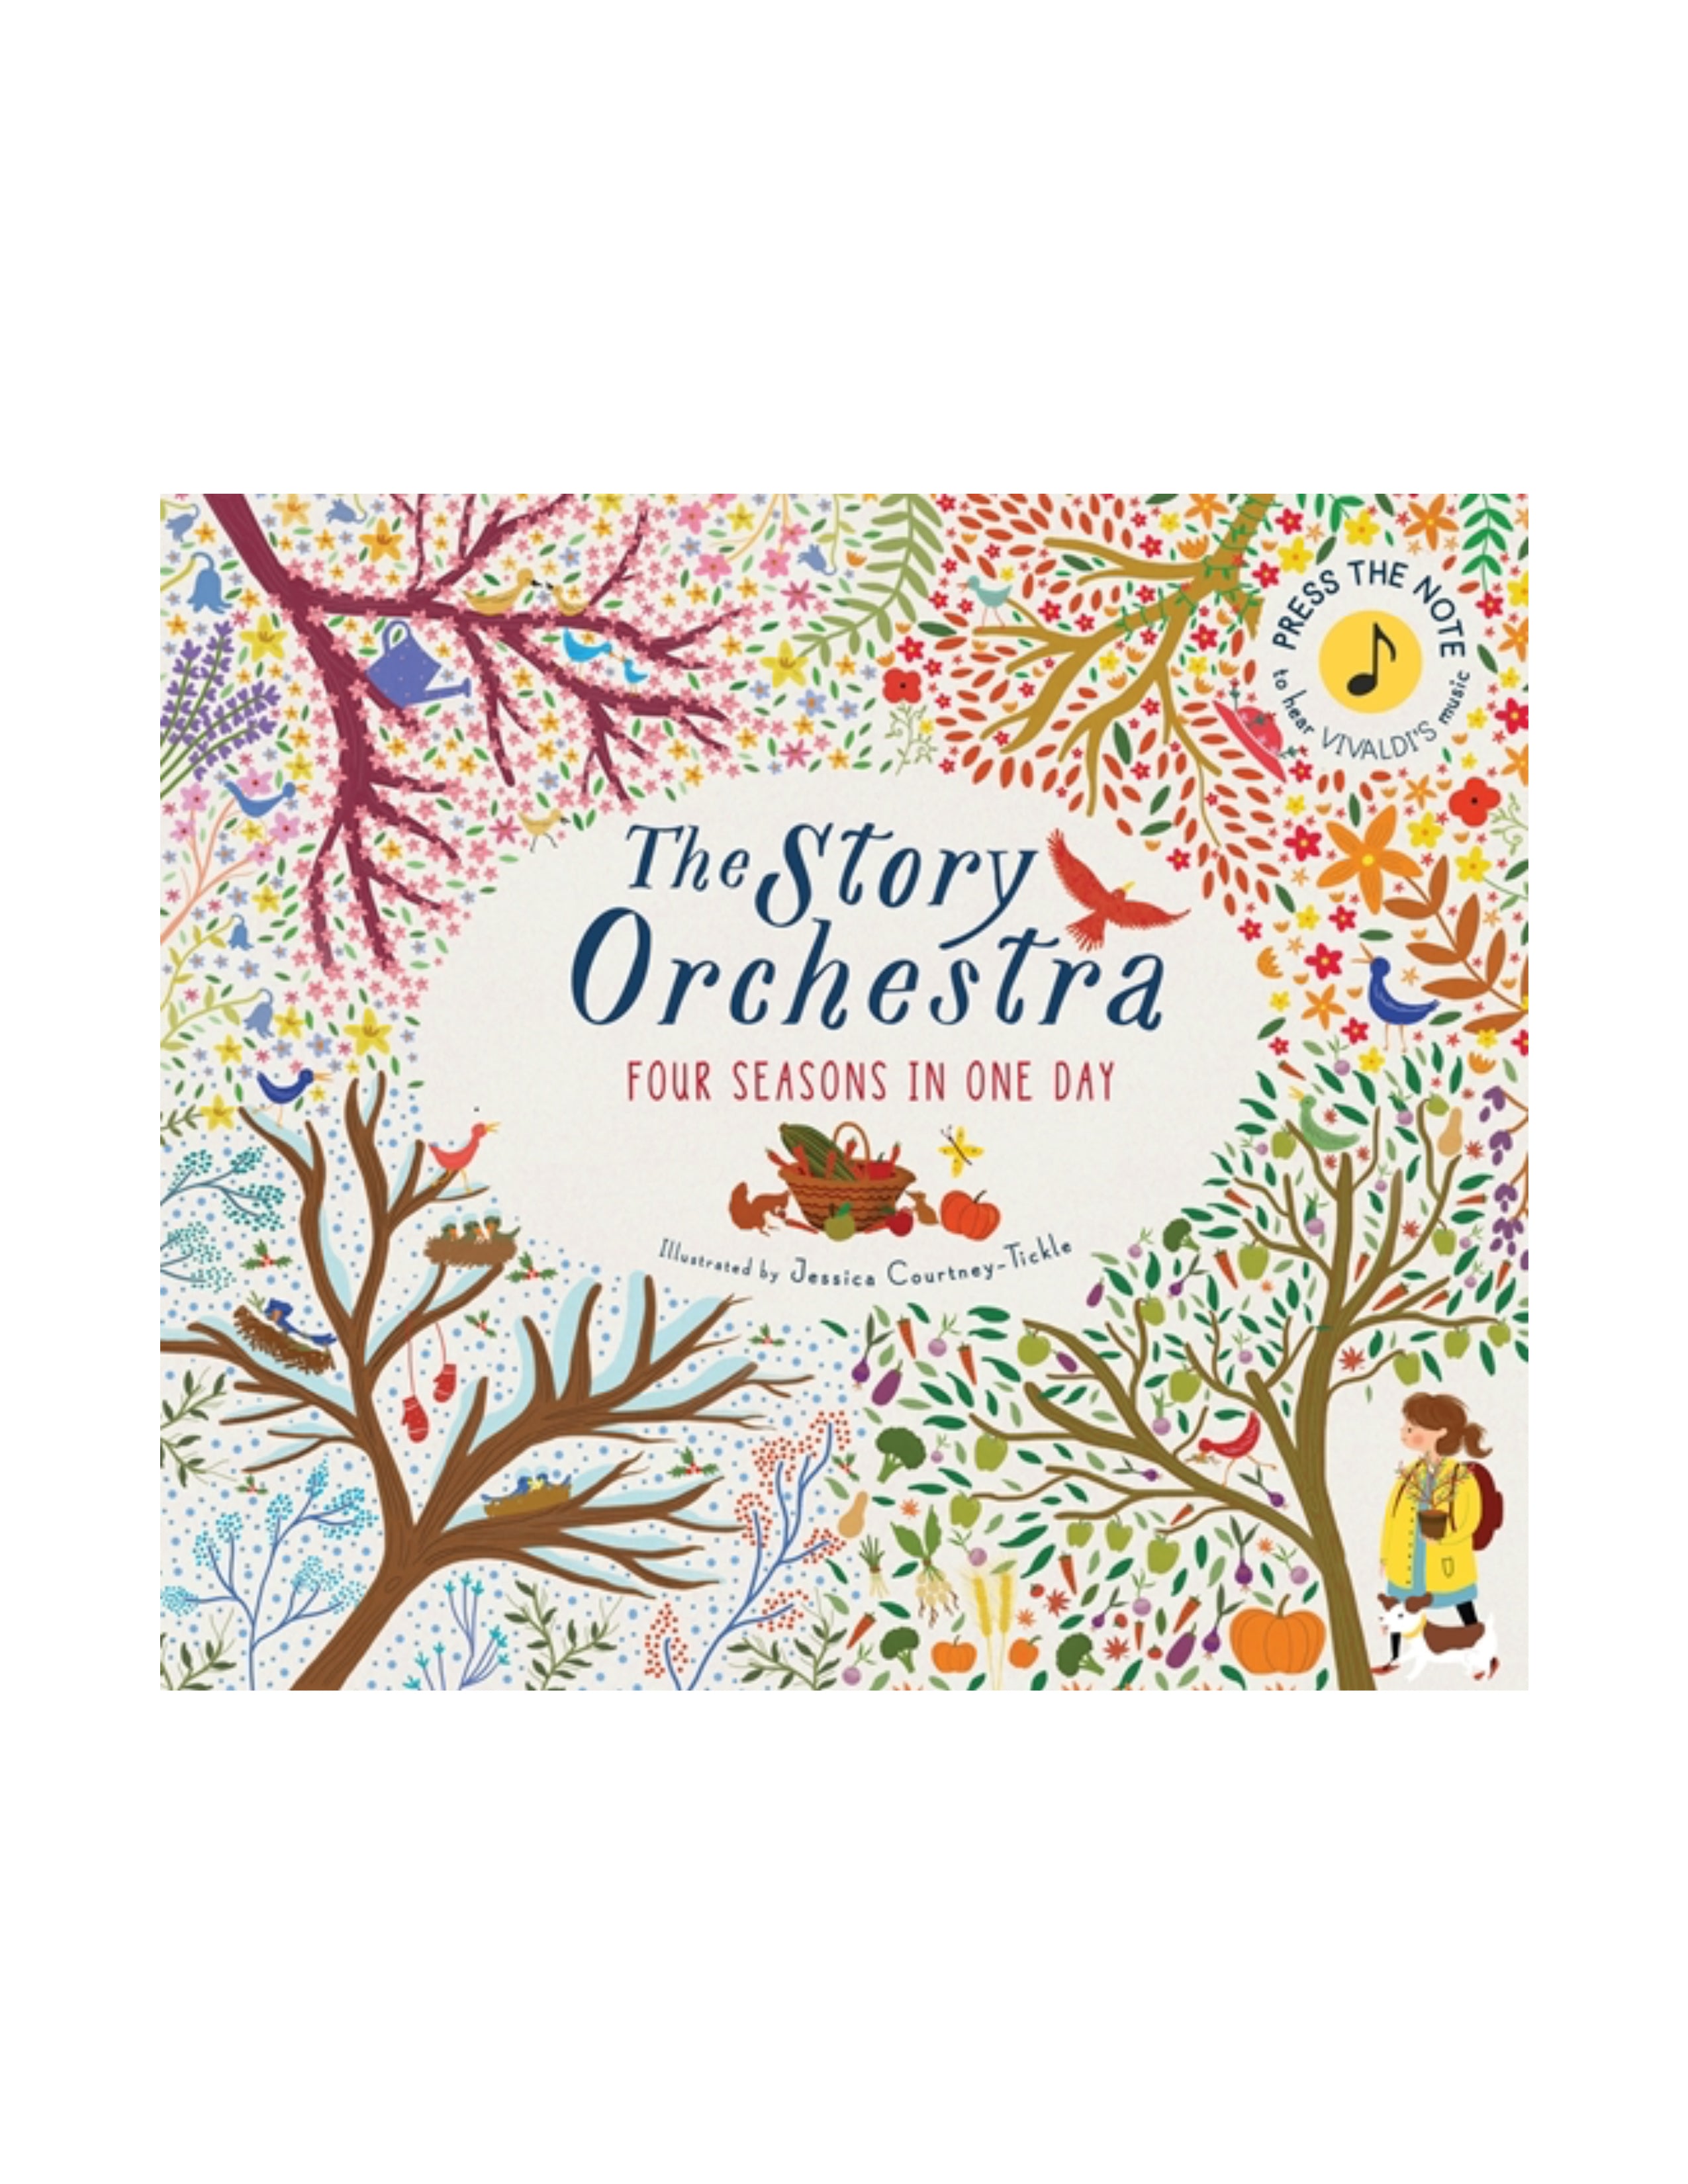 The Story Orchestra: Four Seasons in One Day